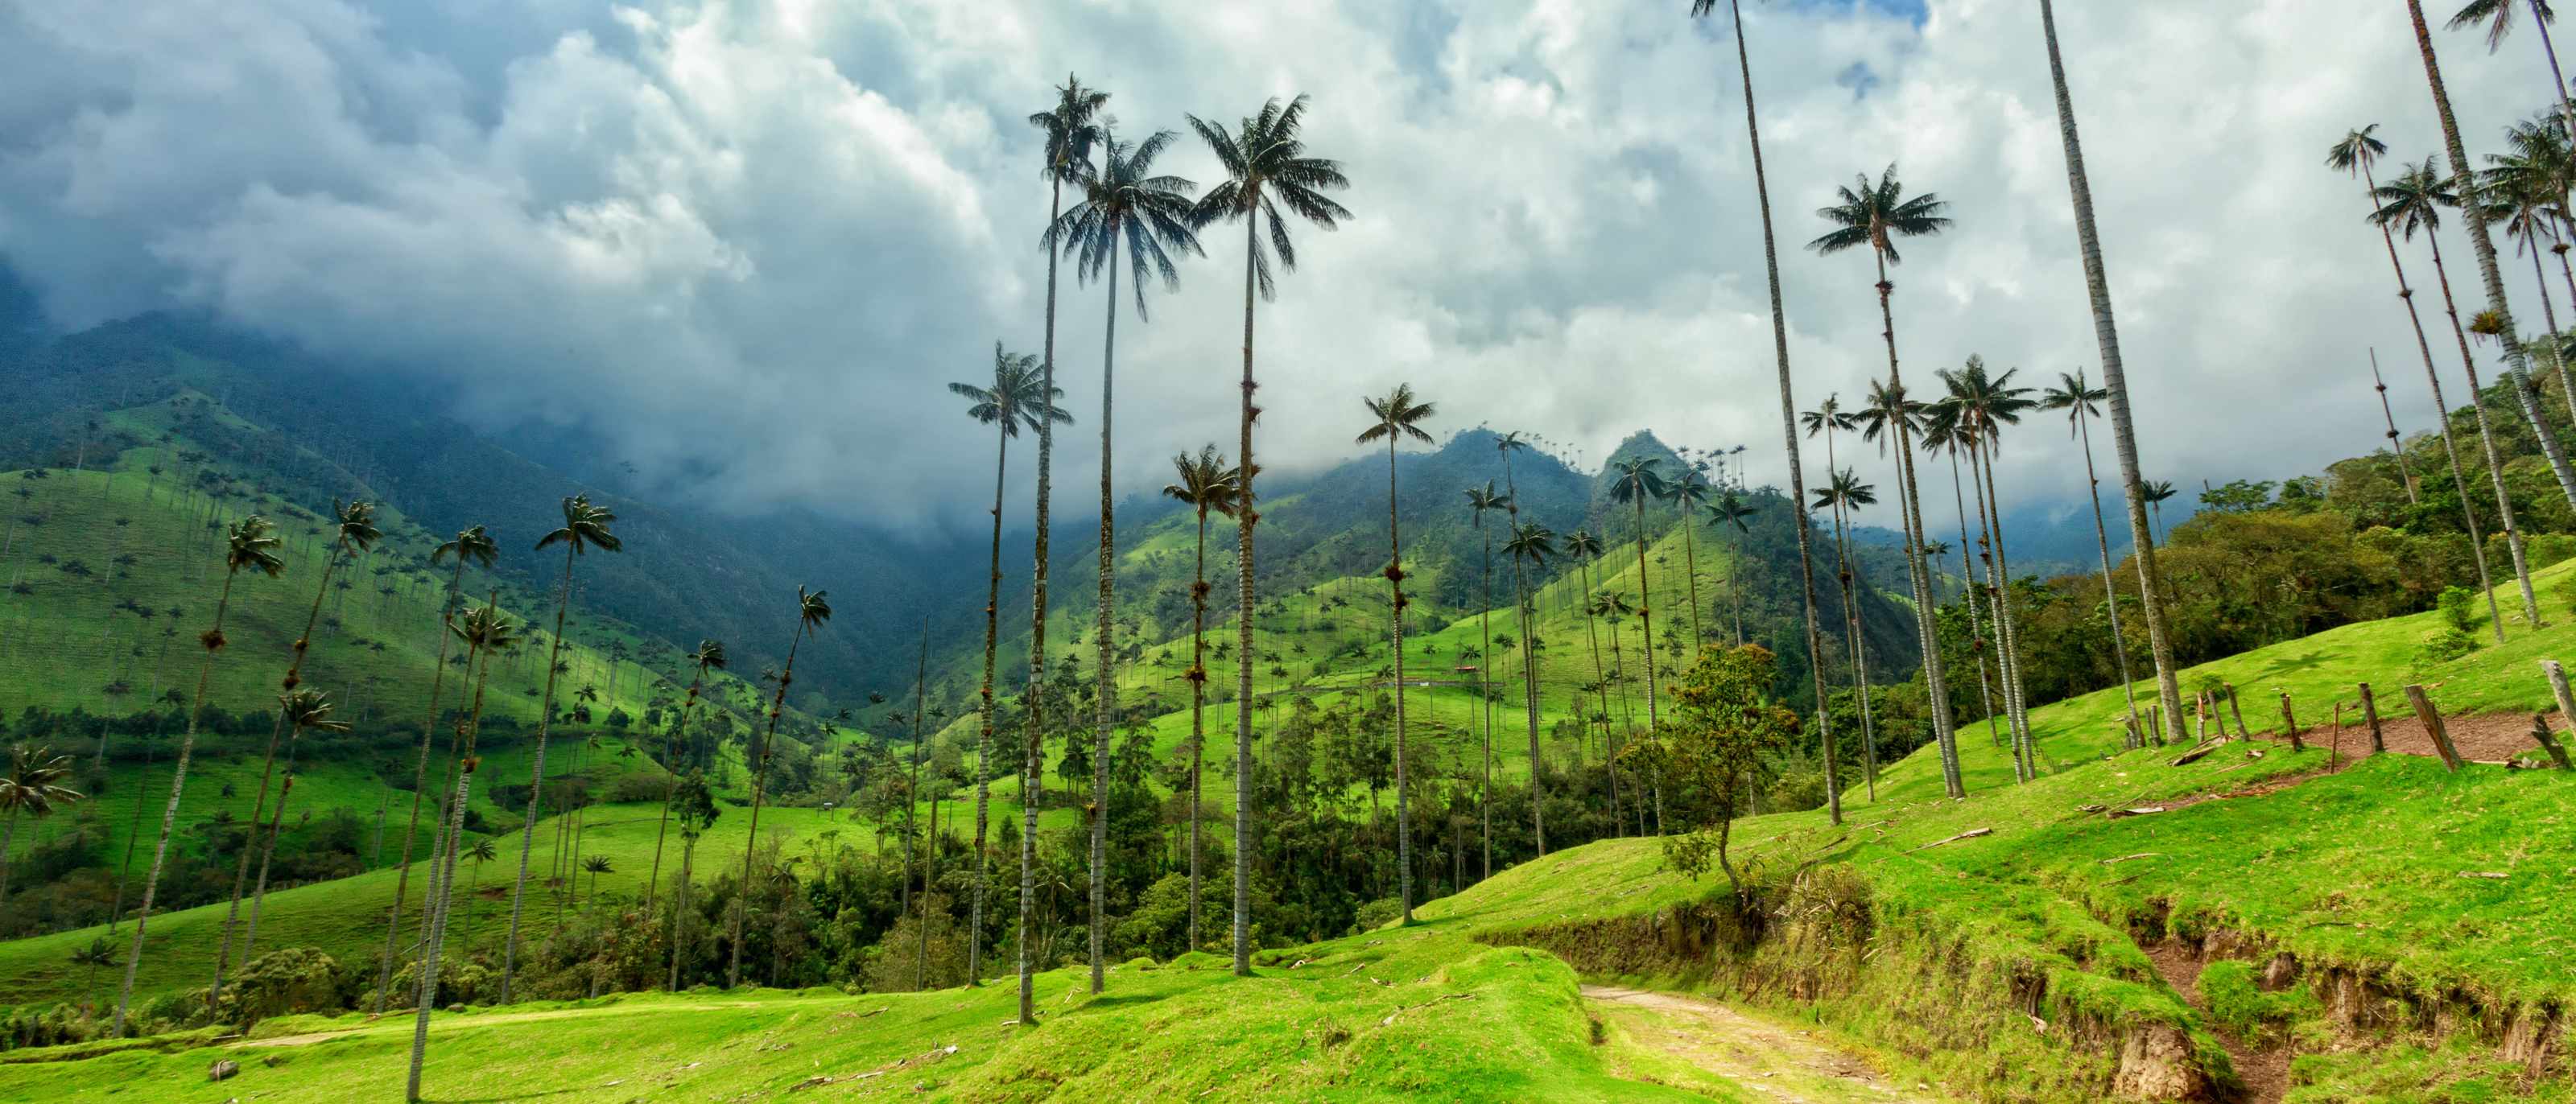 Green pasture in the Cocora Valley near Salento, Colombia.